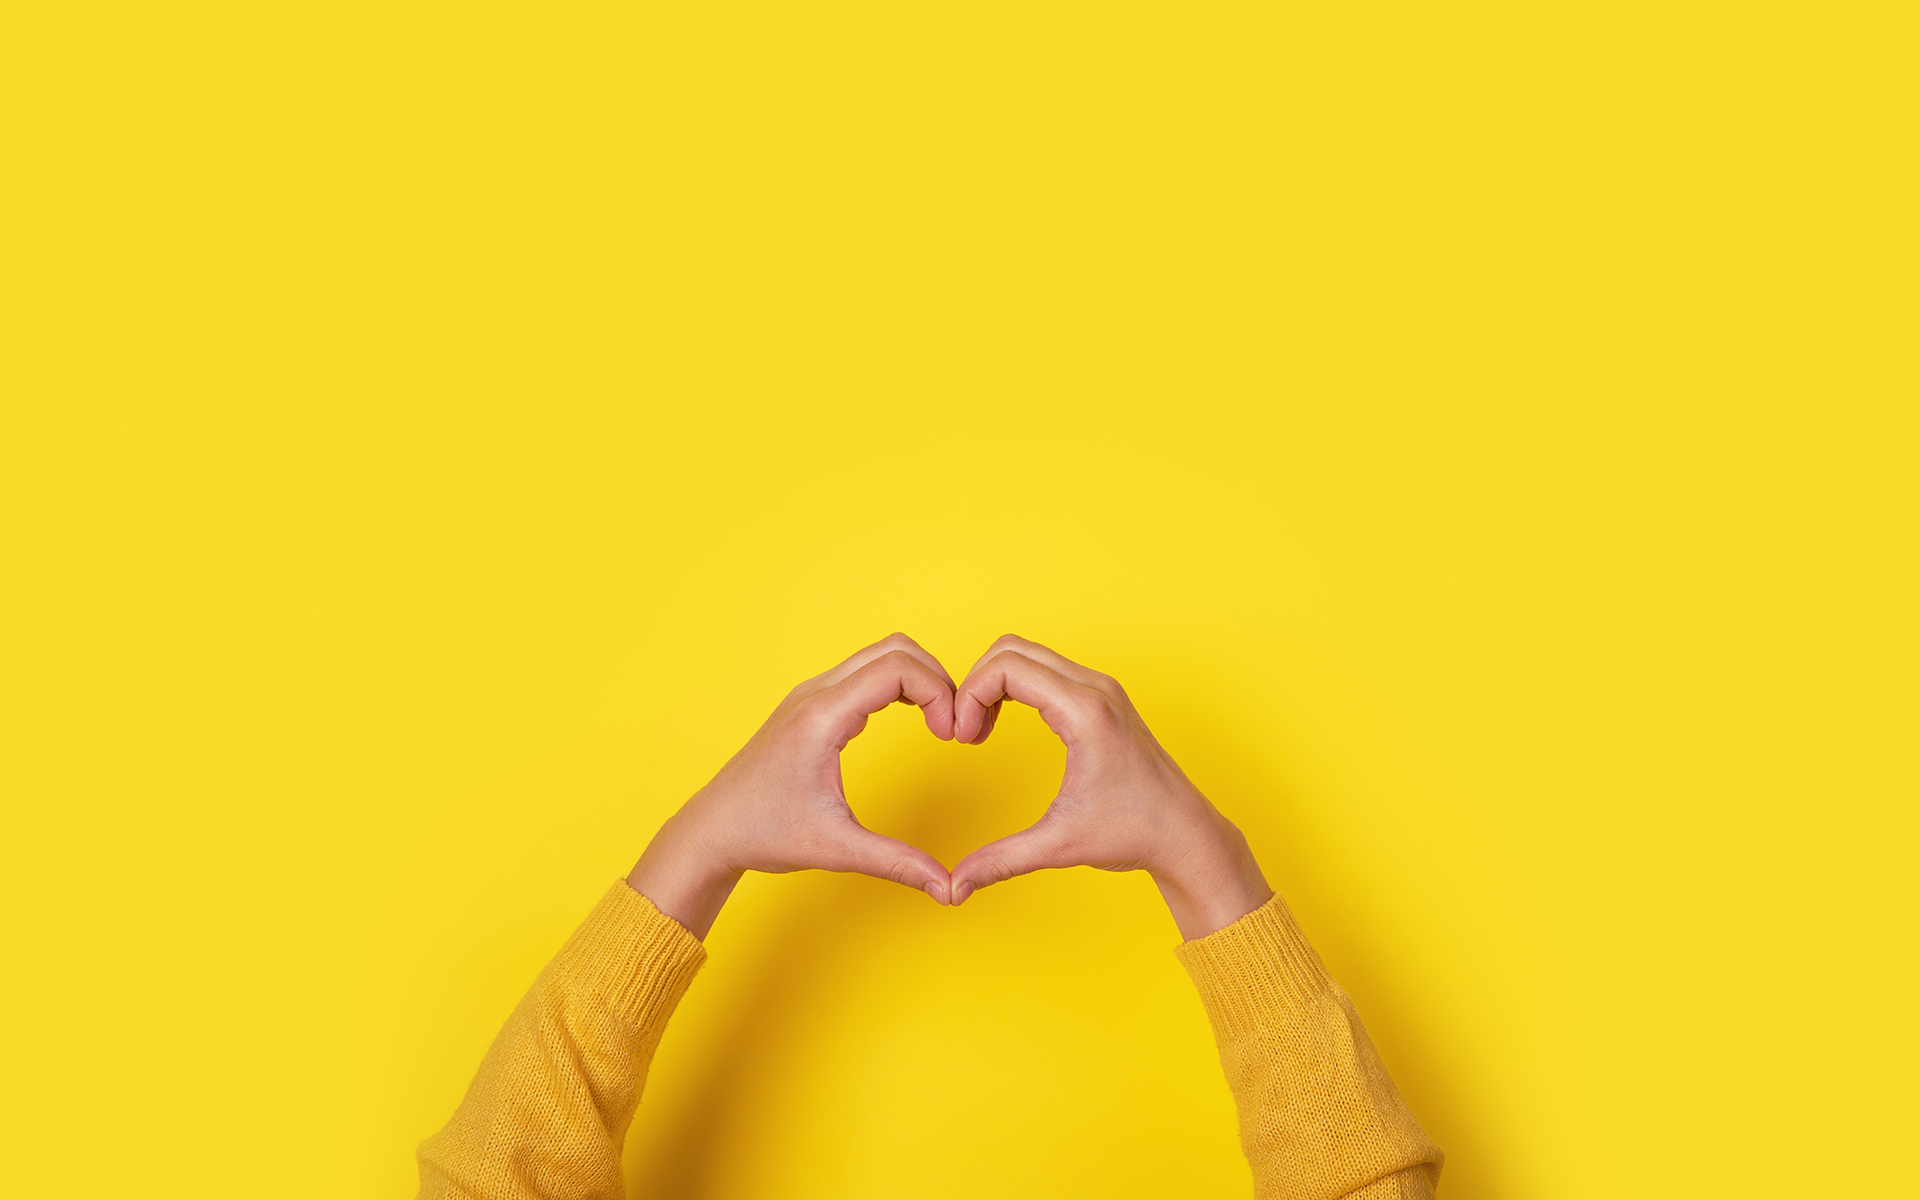 How Compassion and Curiosity Help Me to Be Present—Two hands reach up from the bottom of the frame to form a heart with the hands. The person is wearing a yellow long sleeve shirt and the background is yellow.